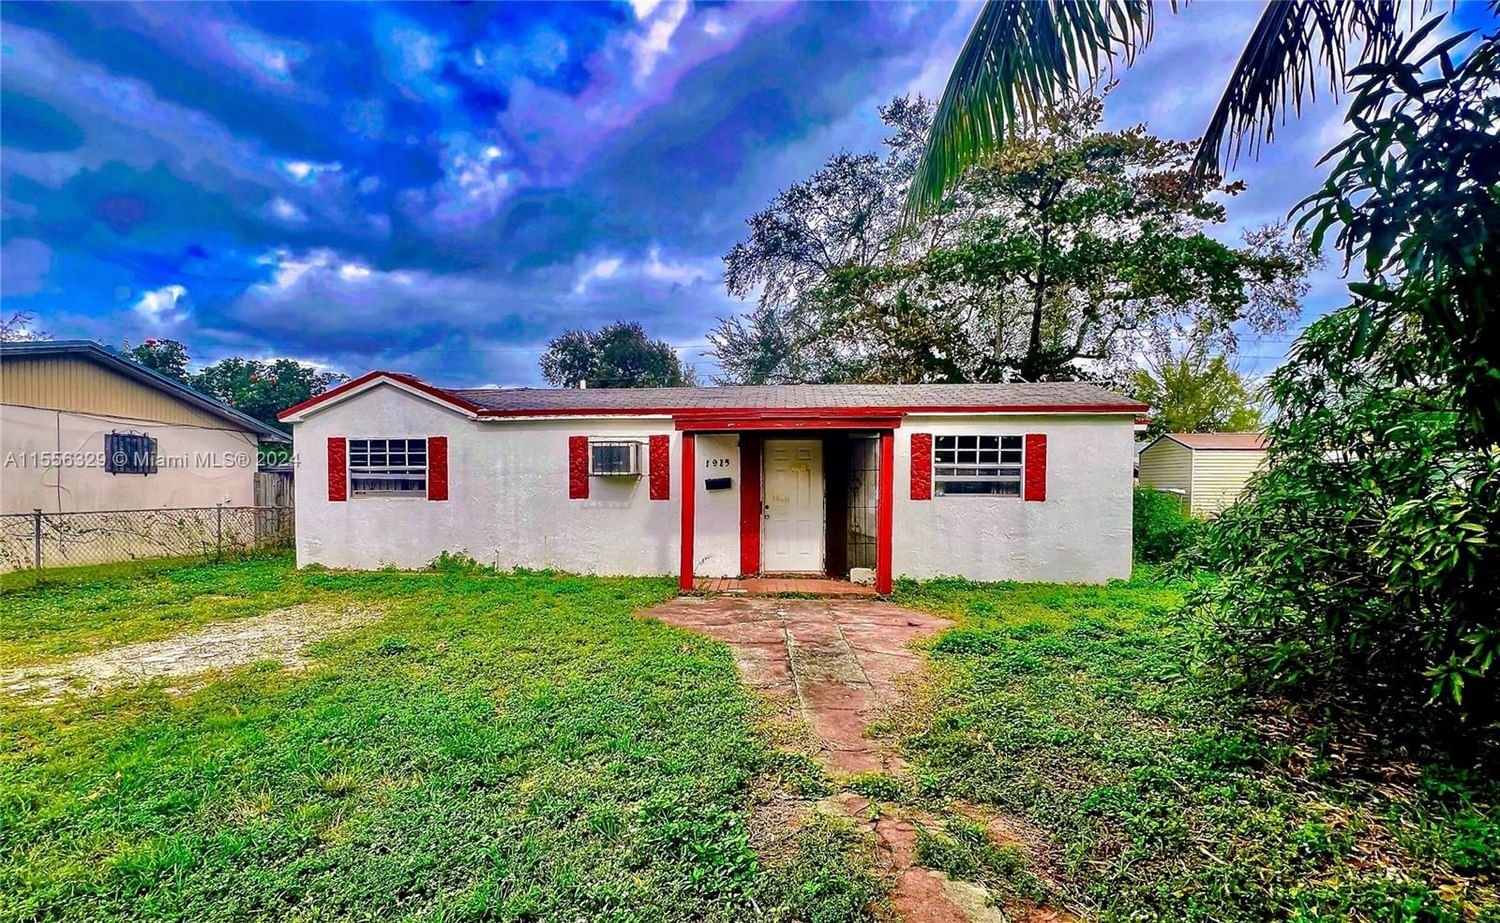 Real estate property located at 1915 83rd St, Miami-Dade County, PL OF NORTH HAVEN, Unincorporated Dade County, FL